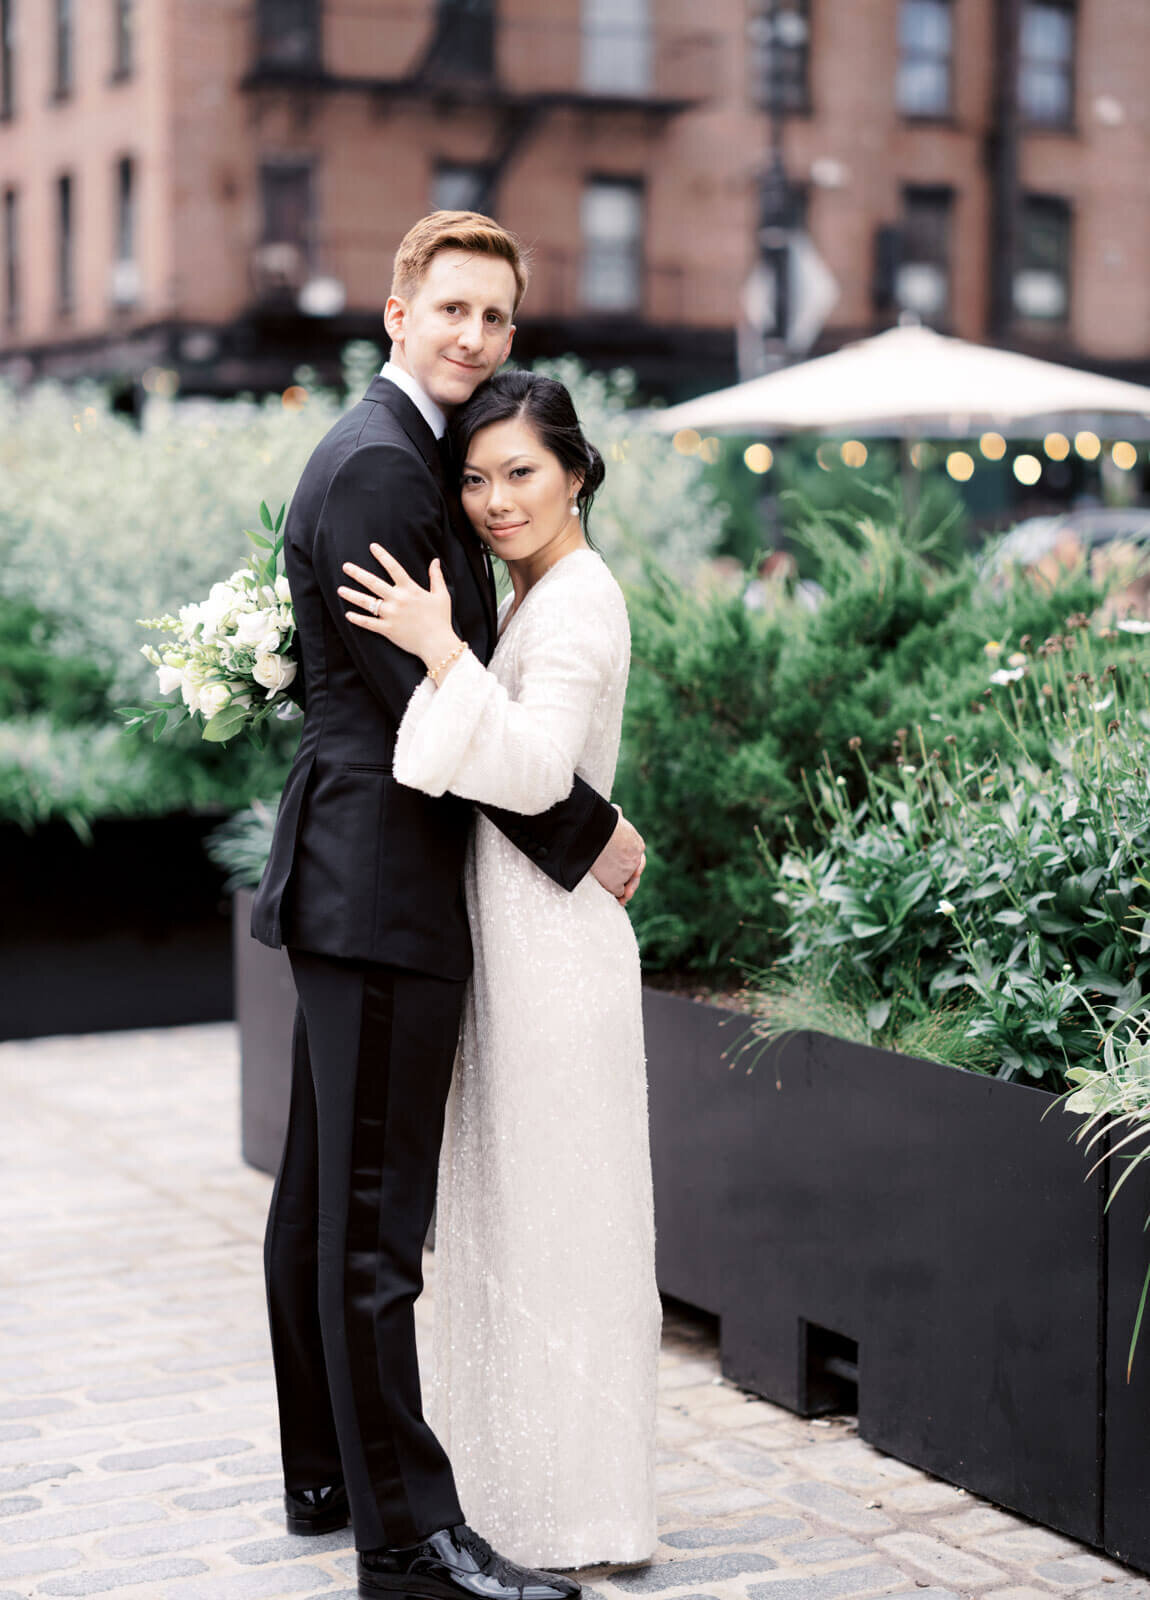 The bride and groom are lightly hugging each other, with some plants and a red brick building in the background in West Village, NYC.